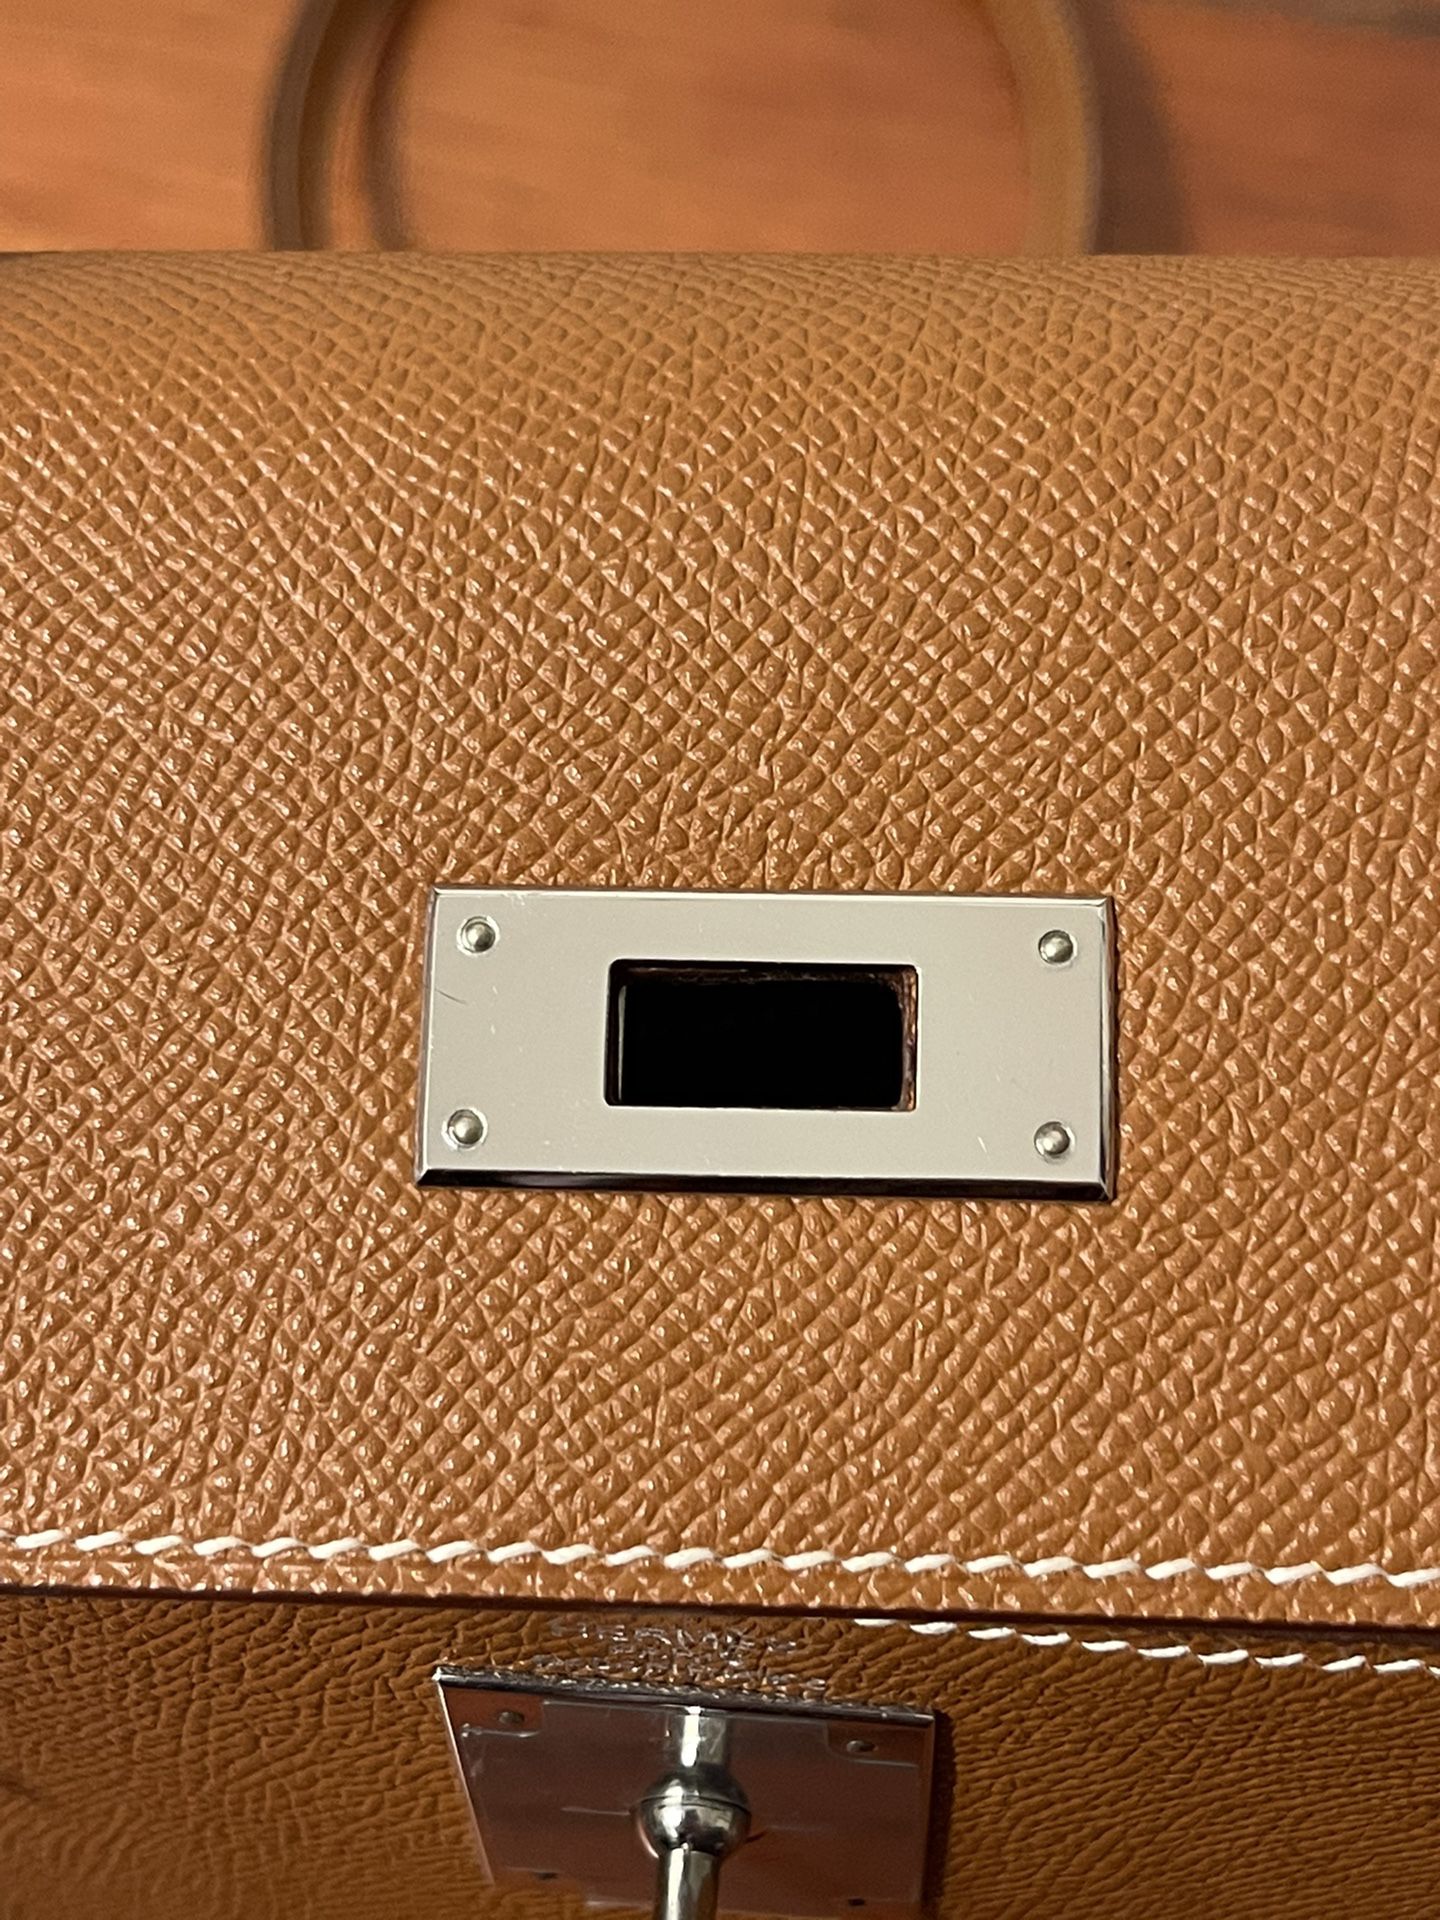 Hermès Kelly Mini Veau Epsom Rogue Red Size 18 for Sale in Anaheim, CA -  OfferUp